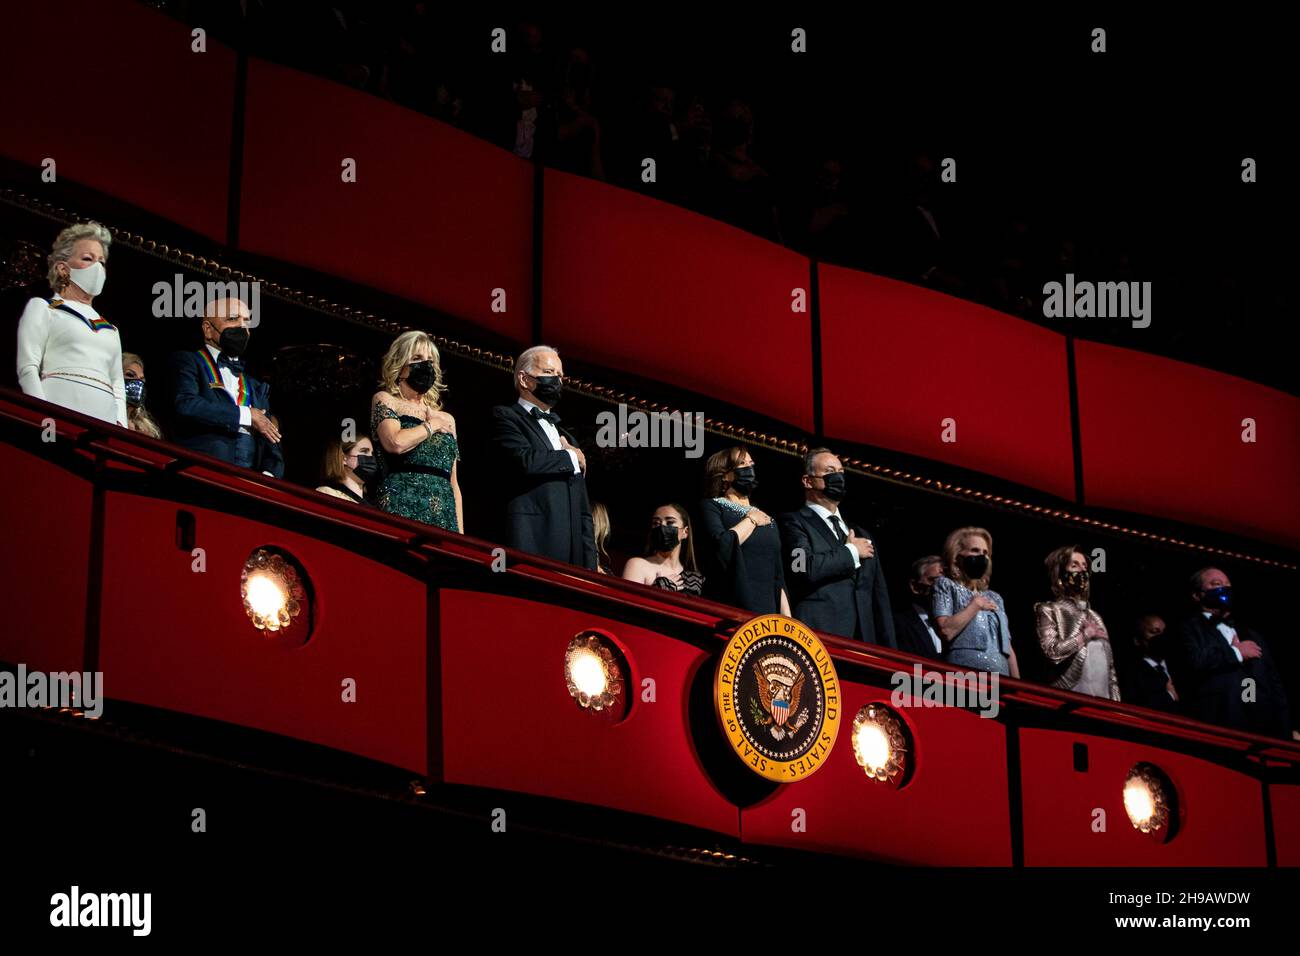 U.S. President Joe Biden, U.S. First Lady Jill Biden, U.S. Vice President Kamala Harris, and Second Gentleman Douglas Emhoff stand for the National Anthem during the 44th Kennedy Center Honors at the John F. Kennedy Center for the Performing Arts in Washington, DC, U.S., on Sunday, Dec. 5, 2021. The 44th Honorees for lifetime artistic achievements include operatic bass-baritone Justino Diaz, Motown founder Berry Gordy, Saturday Night Live creator Lorne Michaels, actress Bette Midler, and singer-songwriter Joni Mitchell. Credit: Al Drago/Pool via CNP /MediaPunch Stock Photo